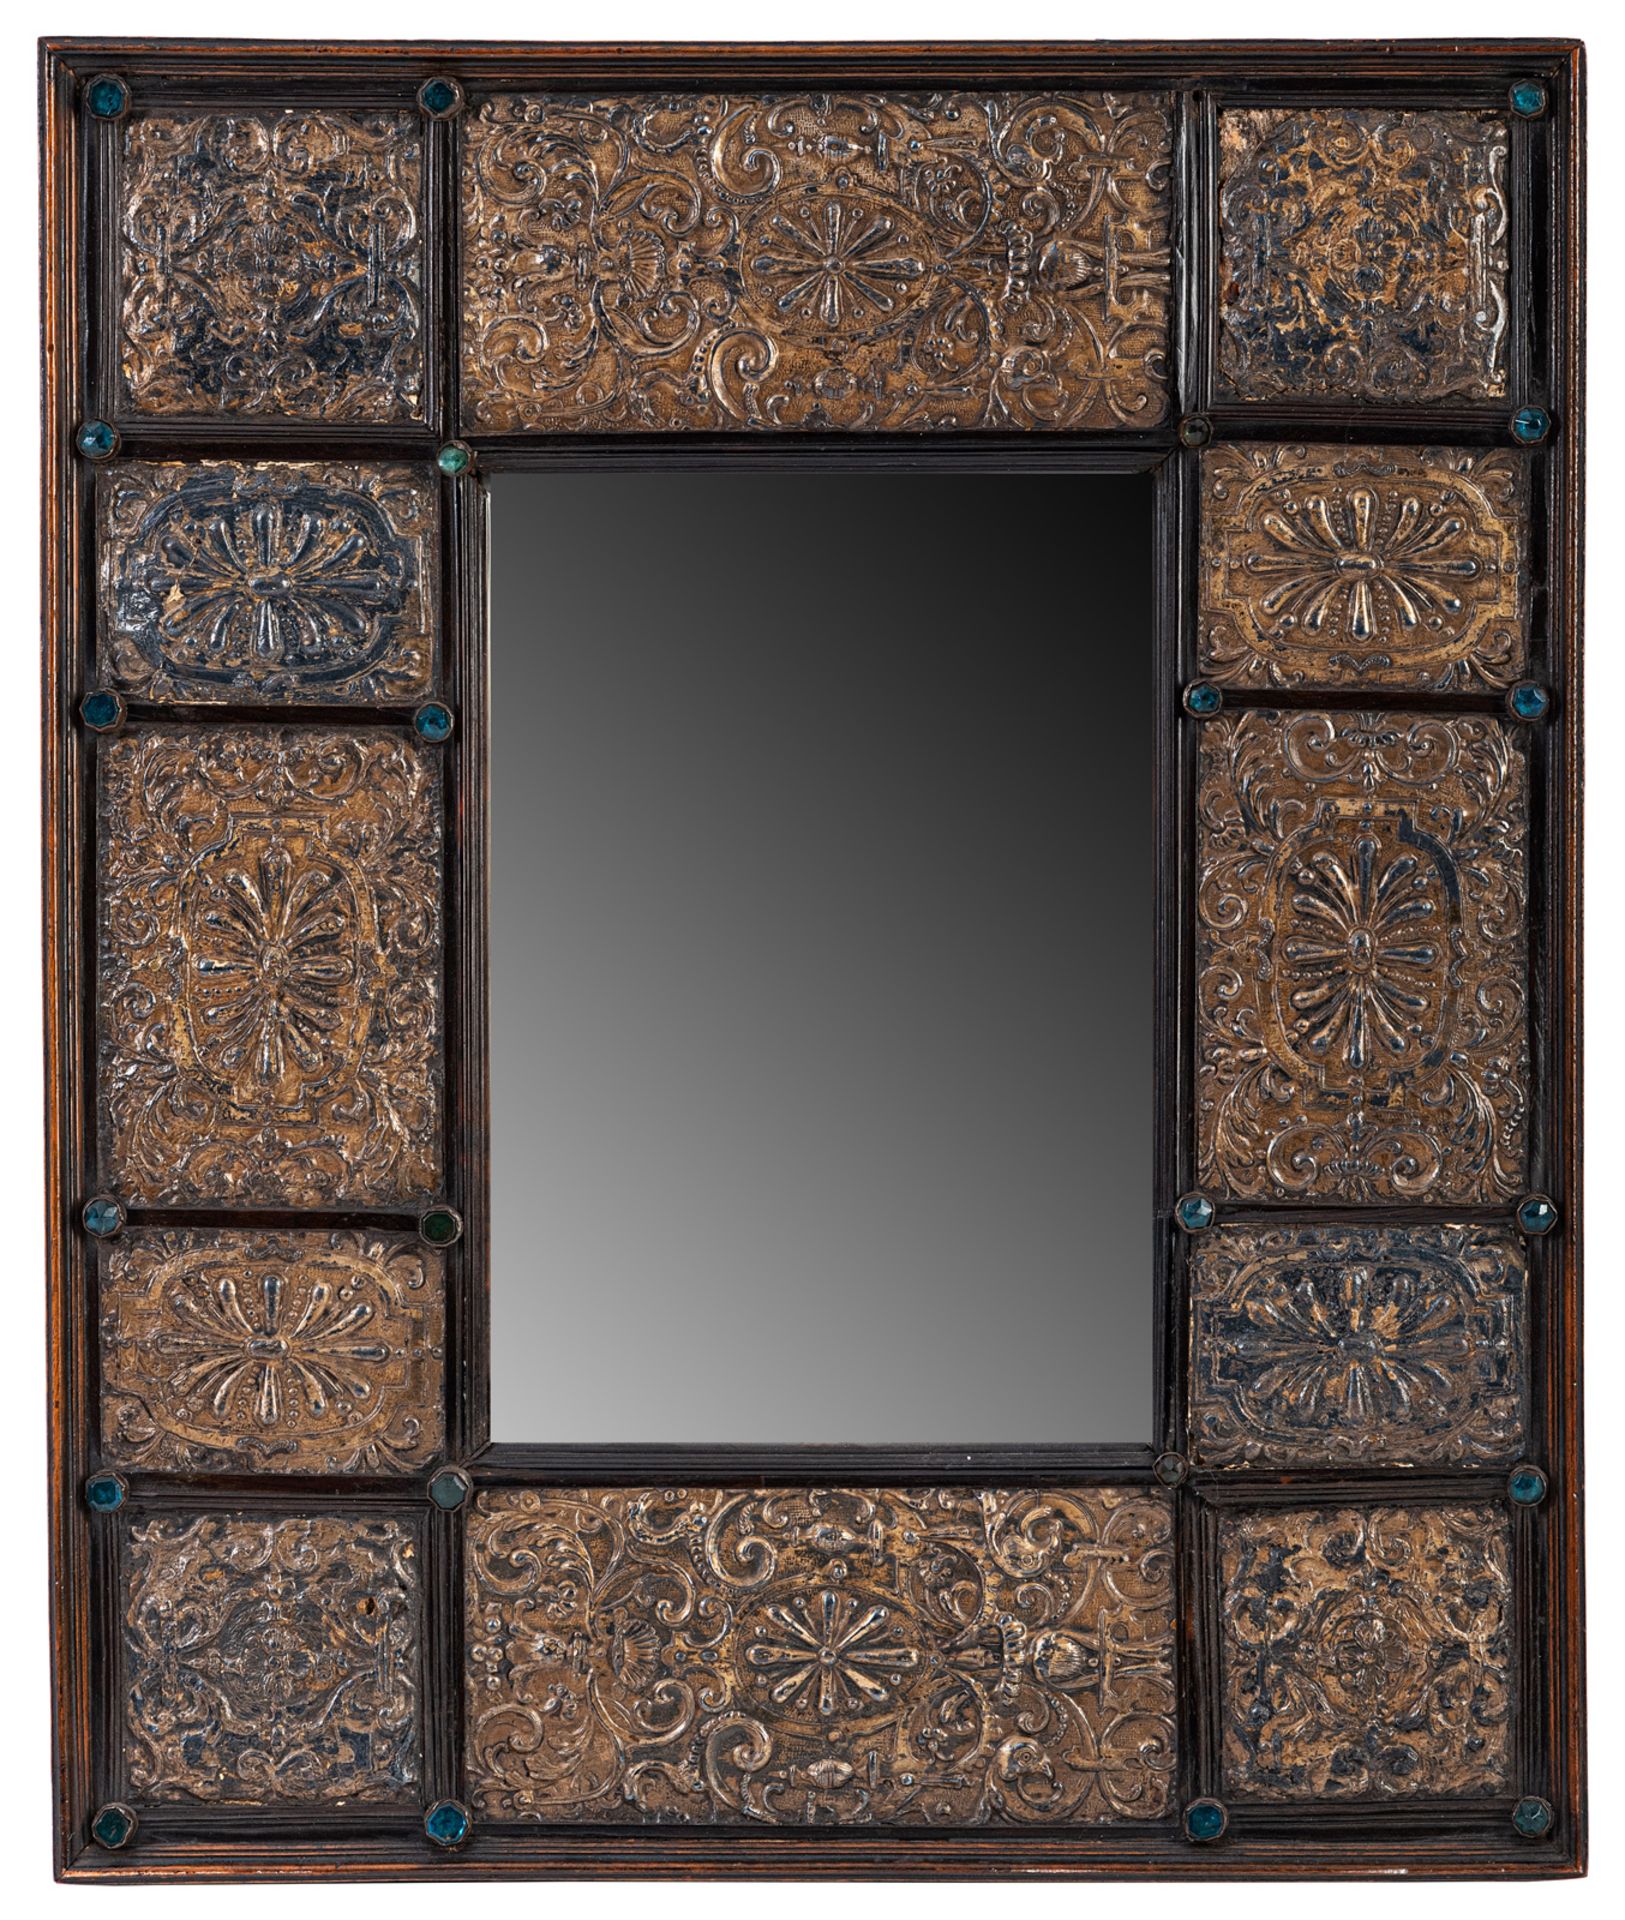 A RENAISSANCE STYLE GILT EMBOSSED BRASS MOUNTED MIRROR